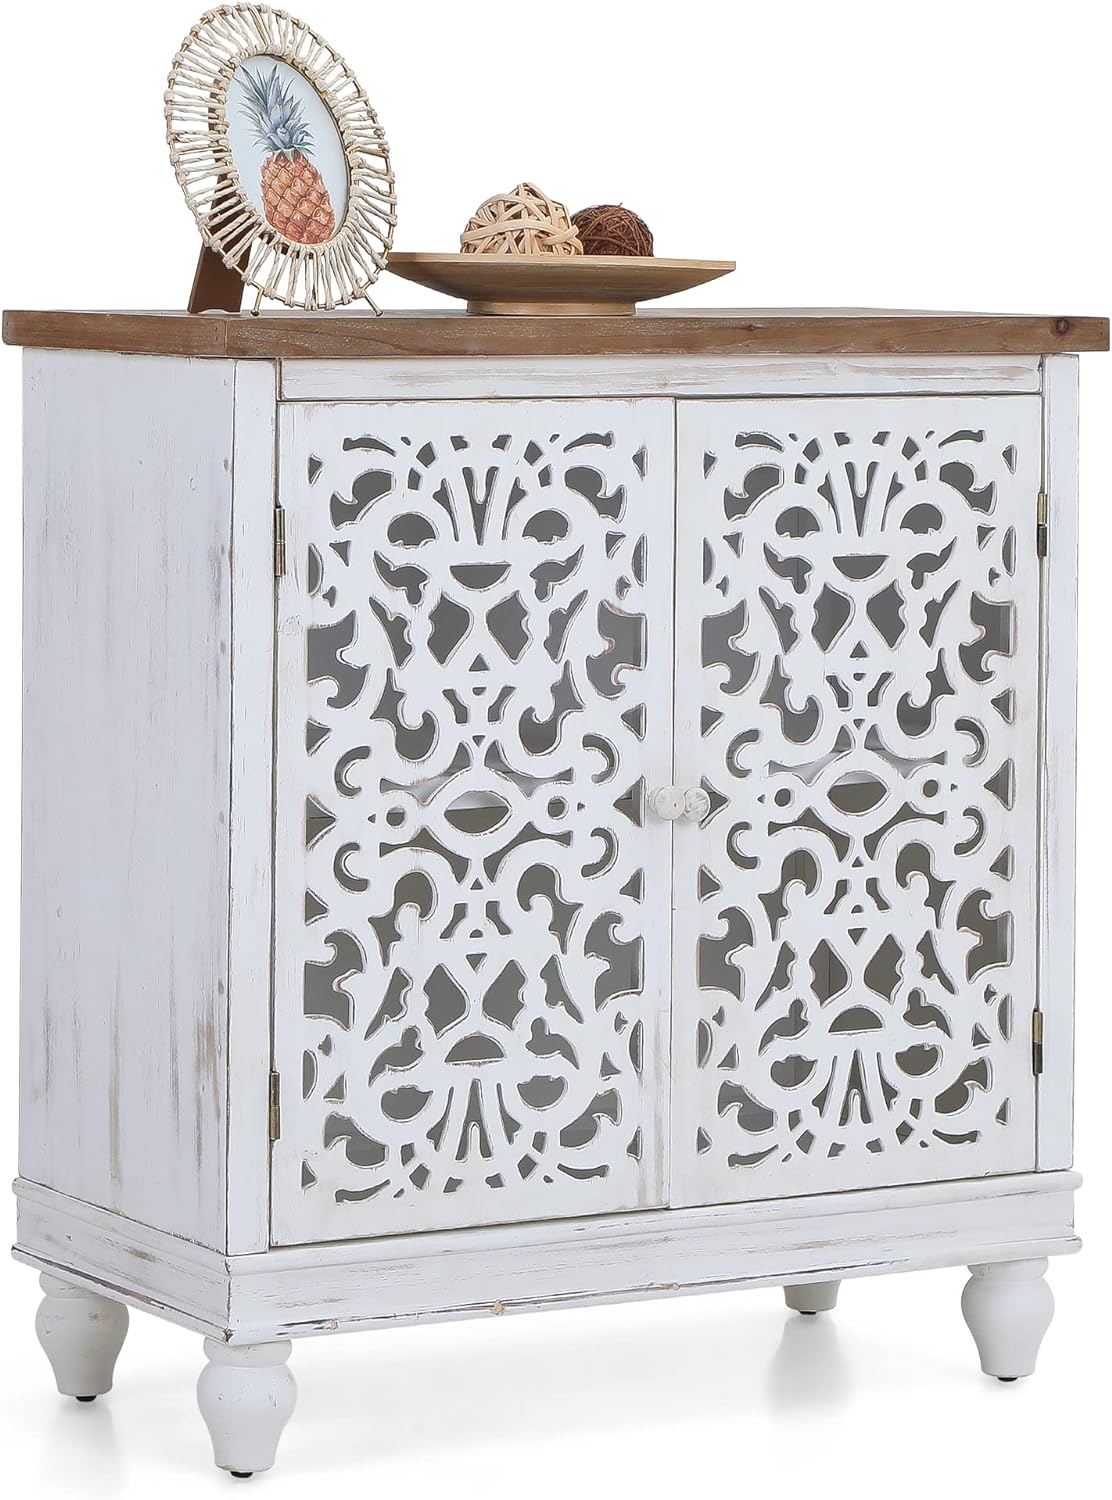 MFSTUDIO Accent Storage Cabinet Buffet Cabinet, Distressed Wooden and Hollow-Carved Floral Sideboard Storage Organizer with 2 Doors, Display Storage for Living Room Entryway Floor Kitchen White Large